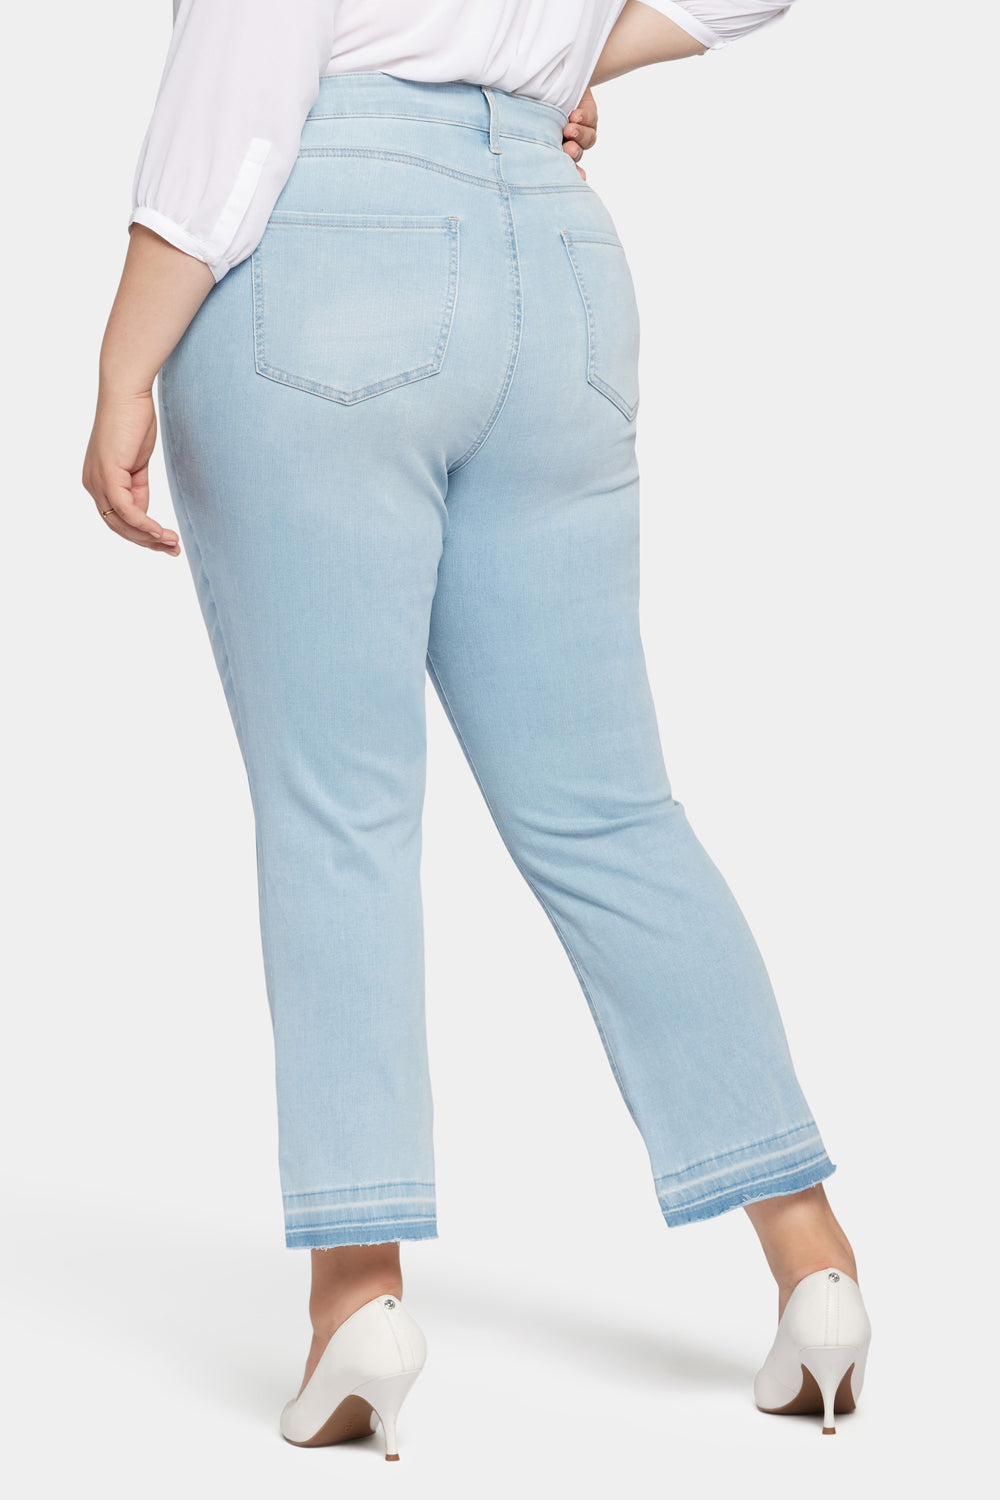 Marilyn Straight Ankle Jeans In Petite Plus Size In Cool Embrace® Denim  With High Rise And Released Hems - Brightside Blue